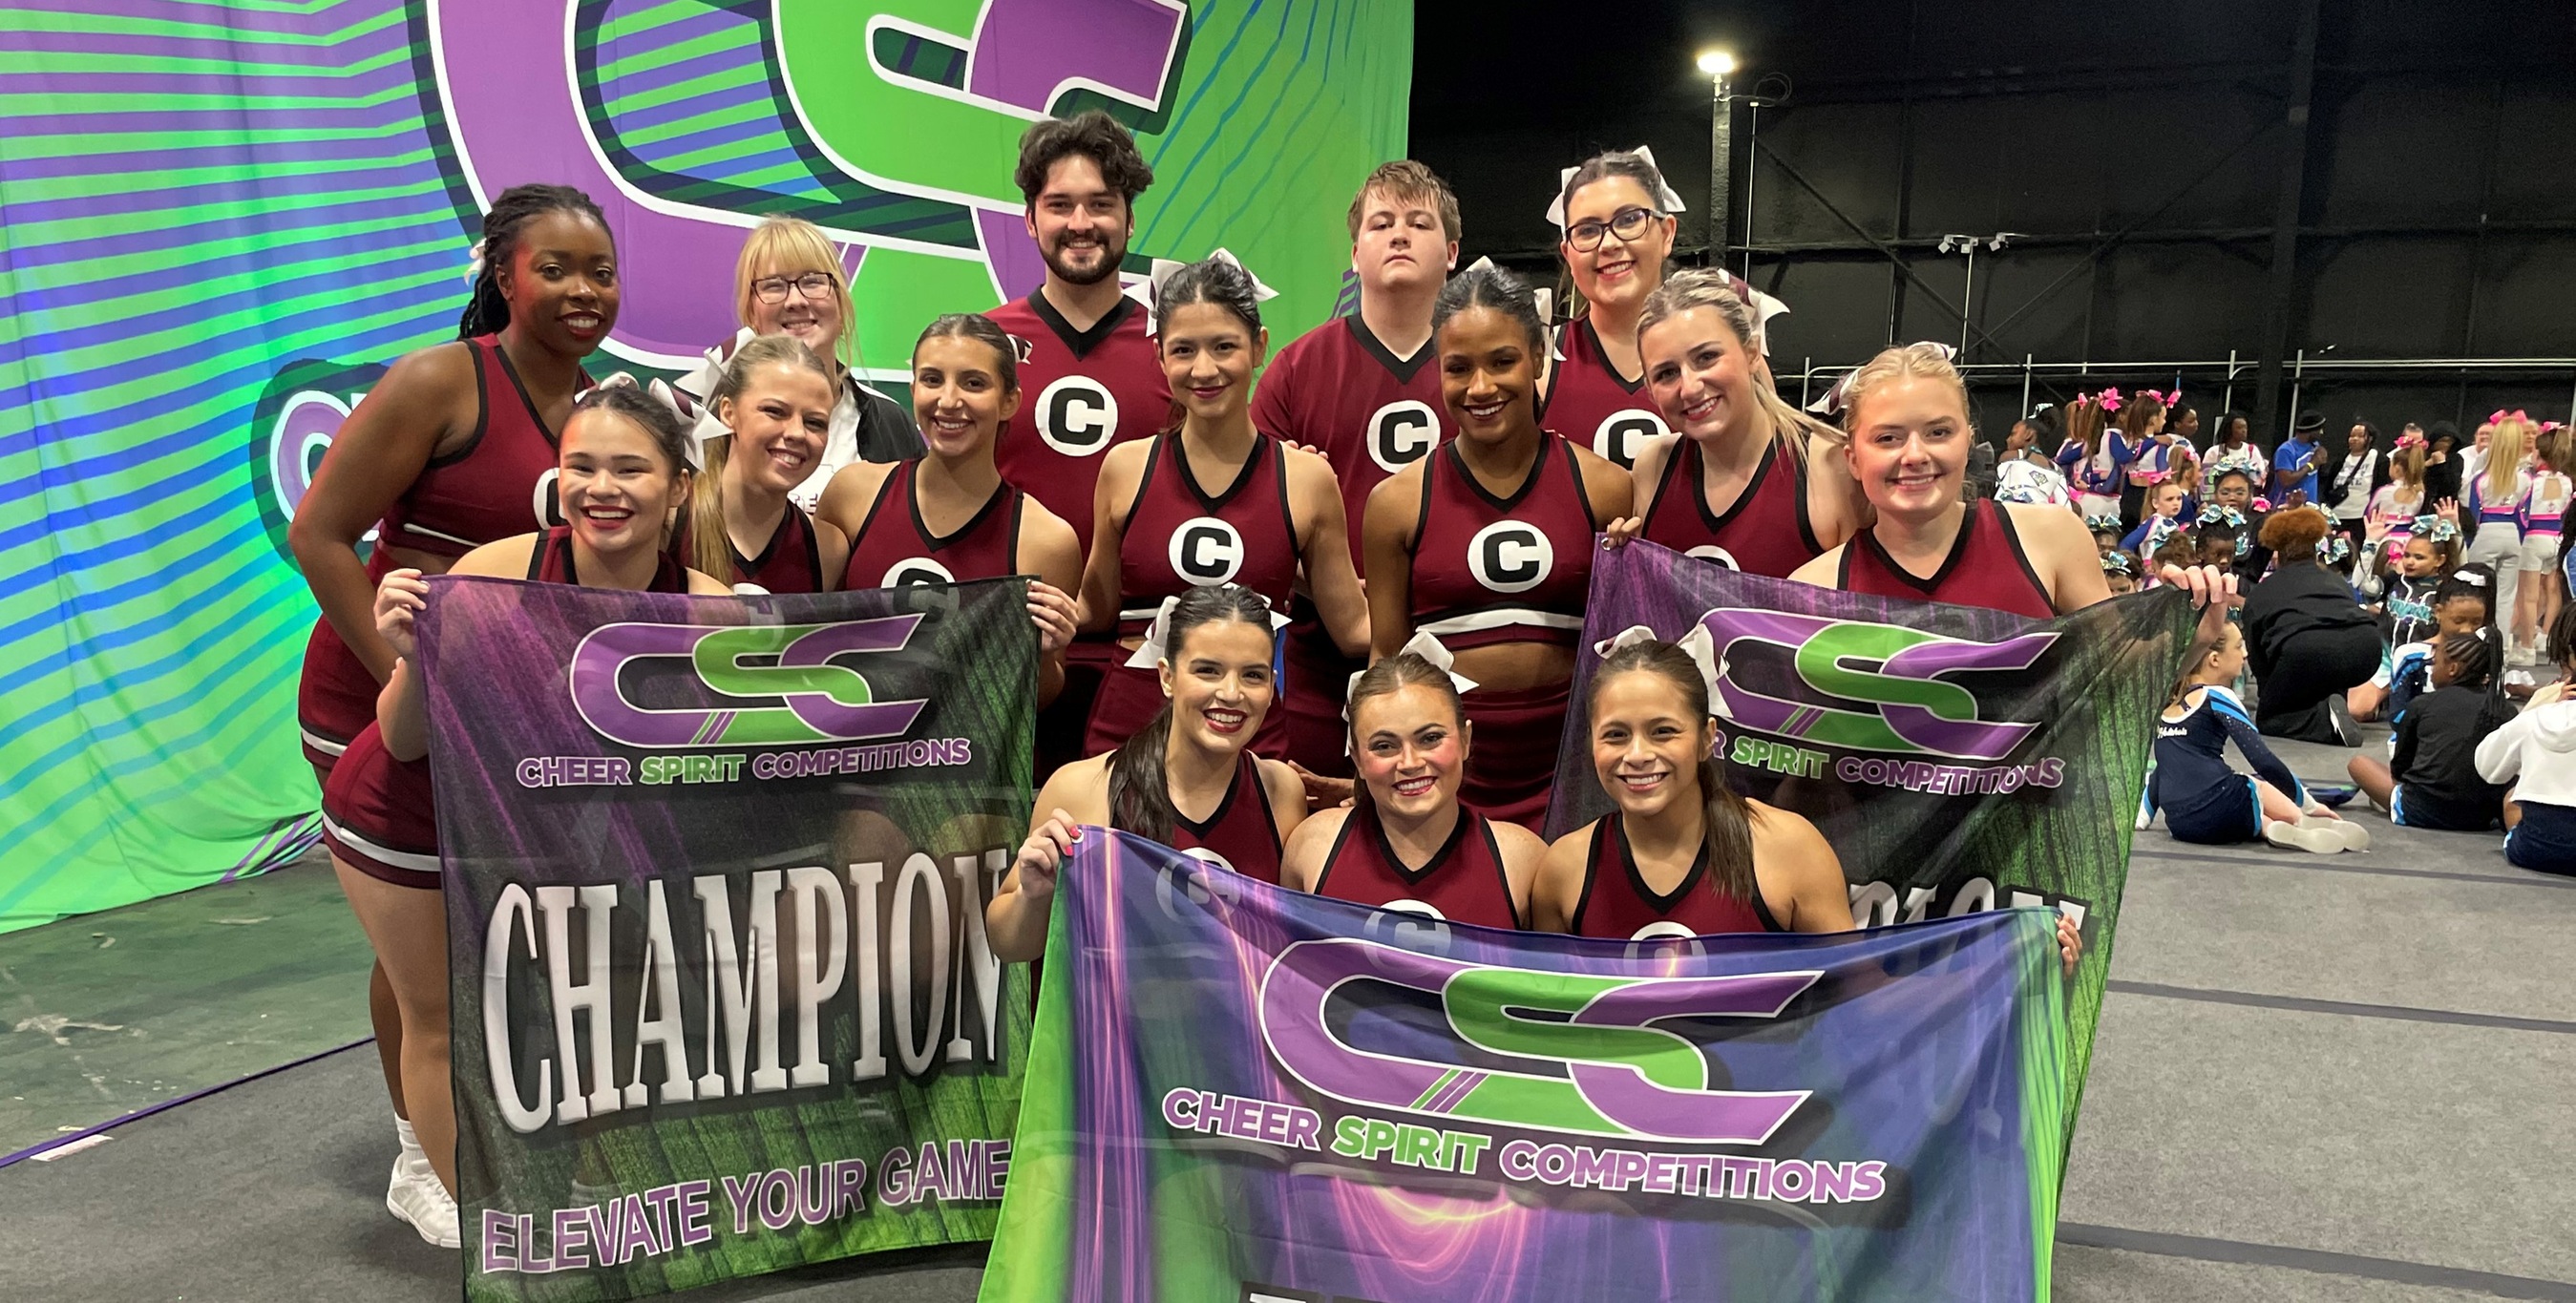 Cheer wrapped up an impressive weekend on Sunday afternoon in Baton Rouge.